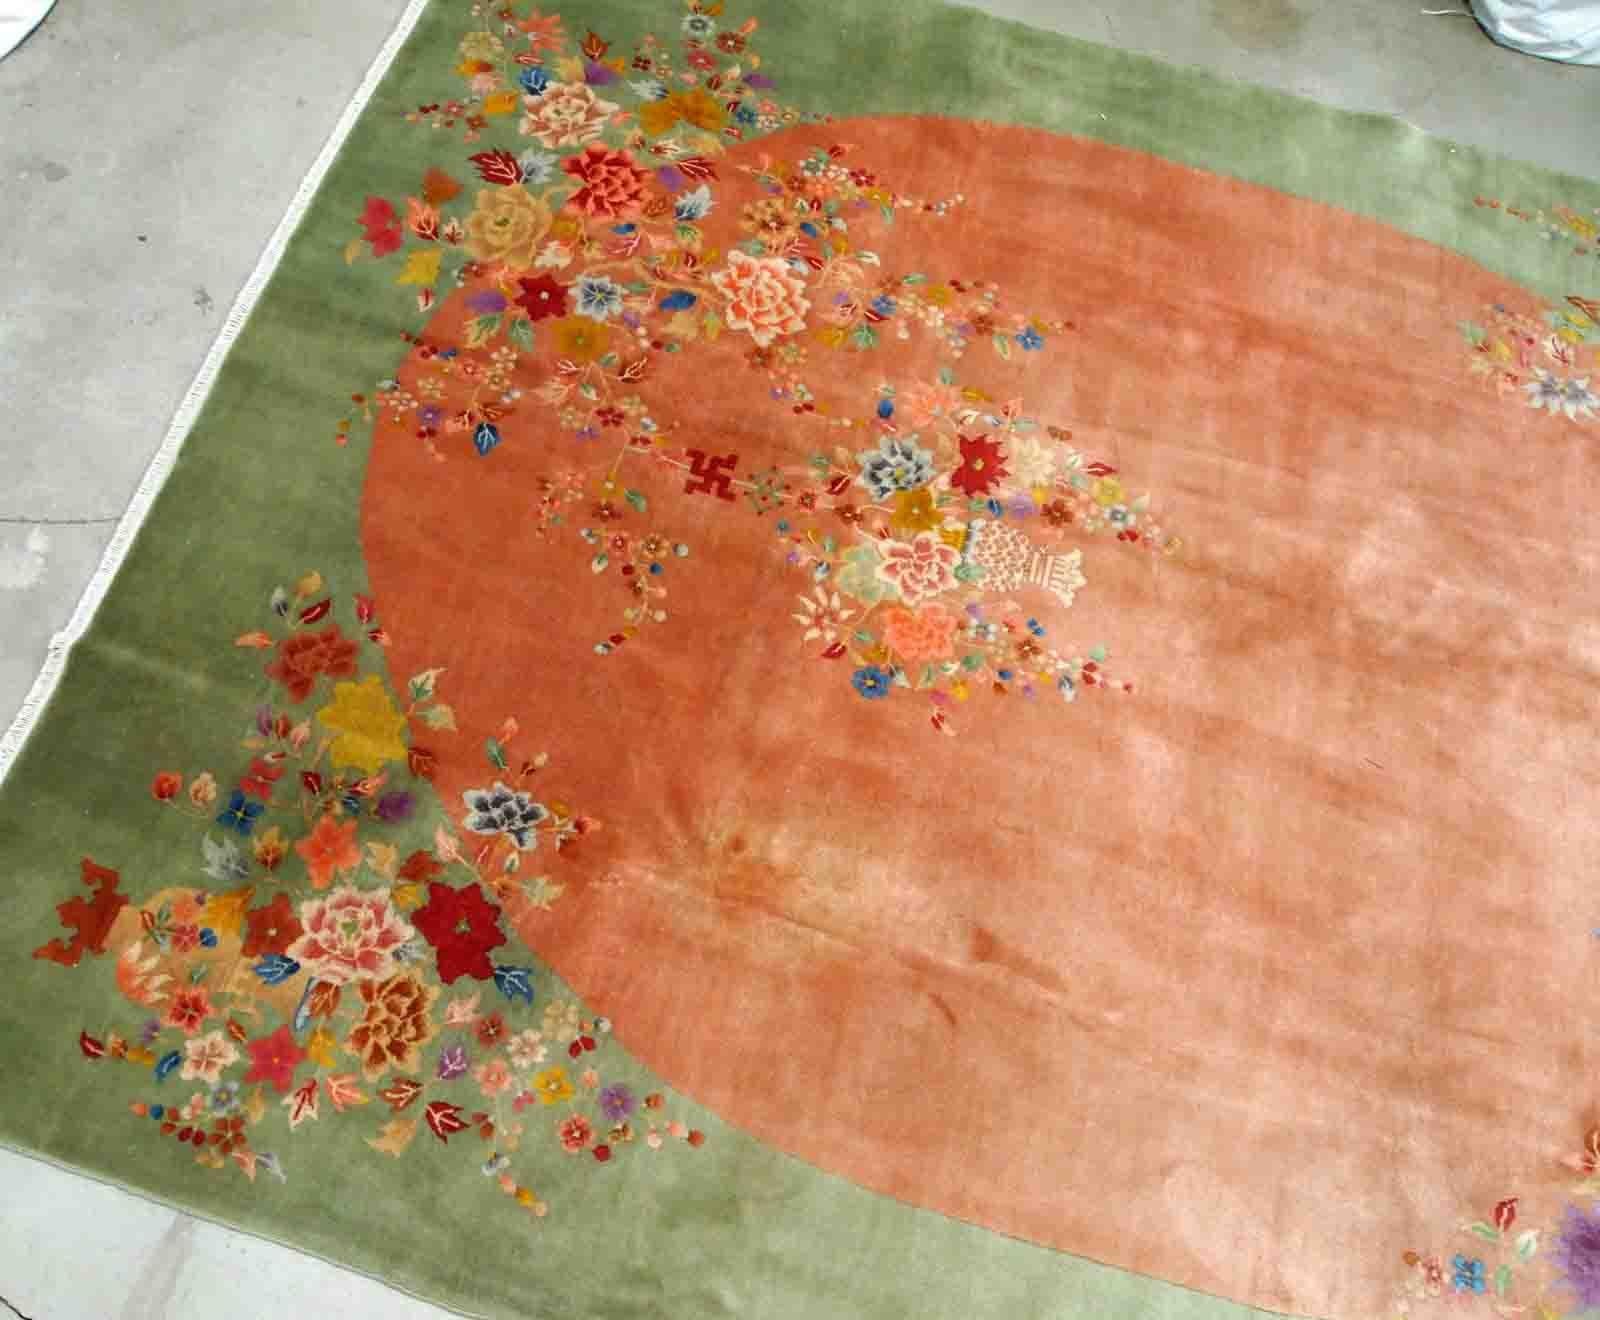 Handmade antique Art Deco Chinese rug in orange and green colours. The rug is from the end of 20th century in original good condition. The rug has a symbol of Indian swastic.

-Condition: original good,

-circa: 1920s,

-Size: 9.1' x 11.6'